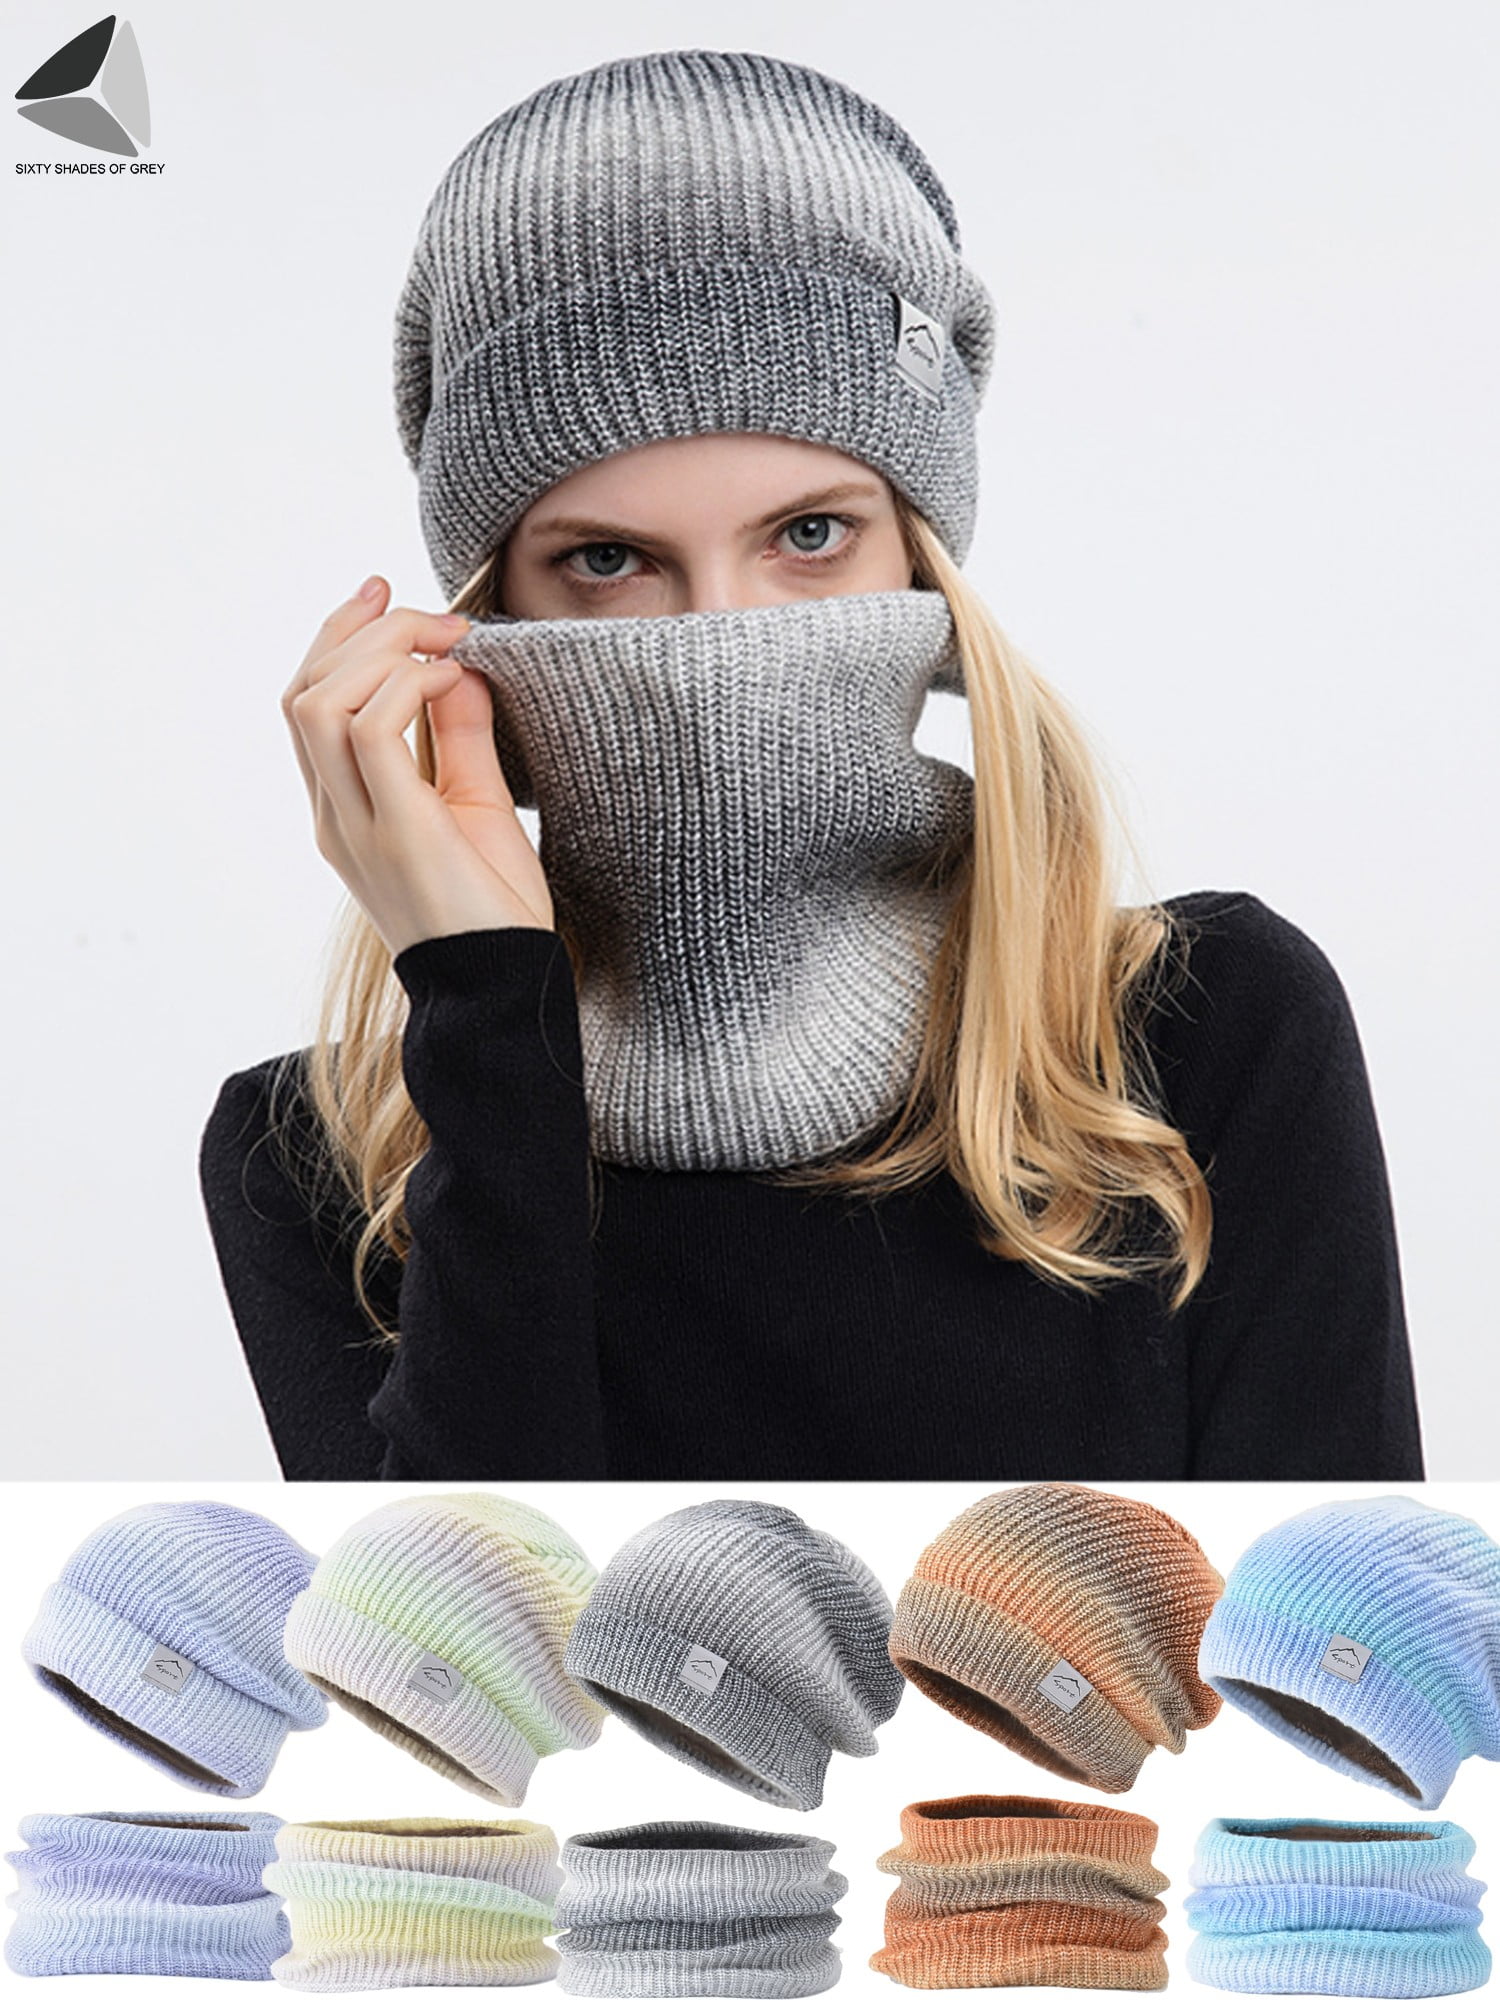 BIFADA Winter Beanie Hat Scarf and Mask Set Thick Warm Knit Fleece Lined Skull Cap Scarf Mouth Mask 